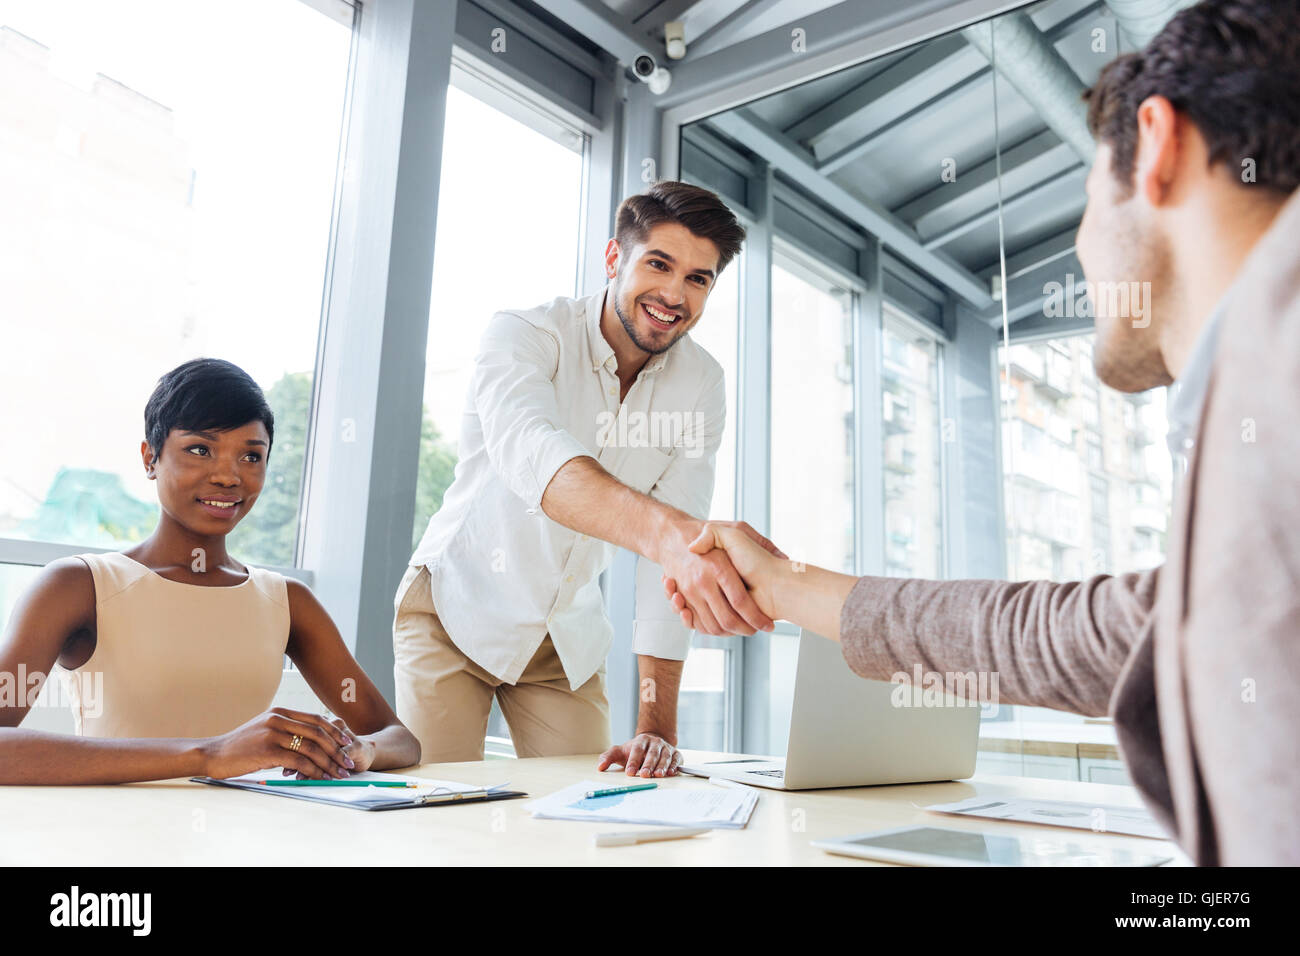 Two young businessmen shaking hands and ending business meeting in office Stock Photo